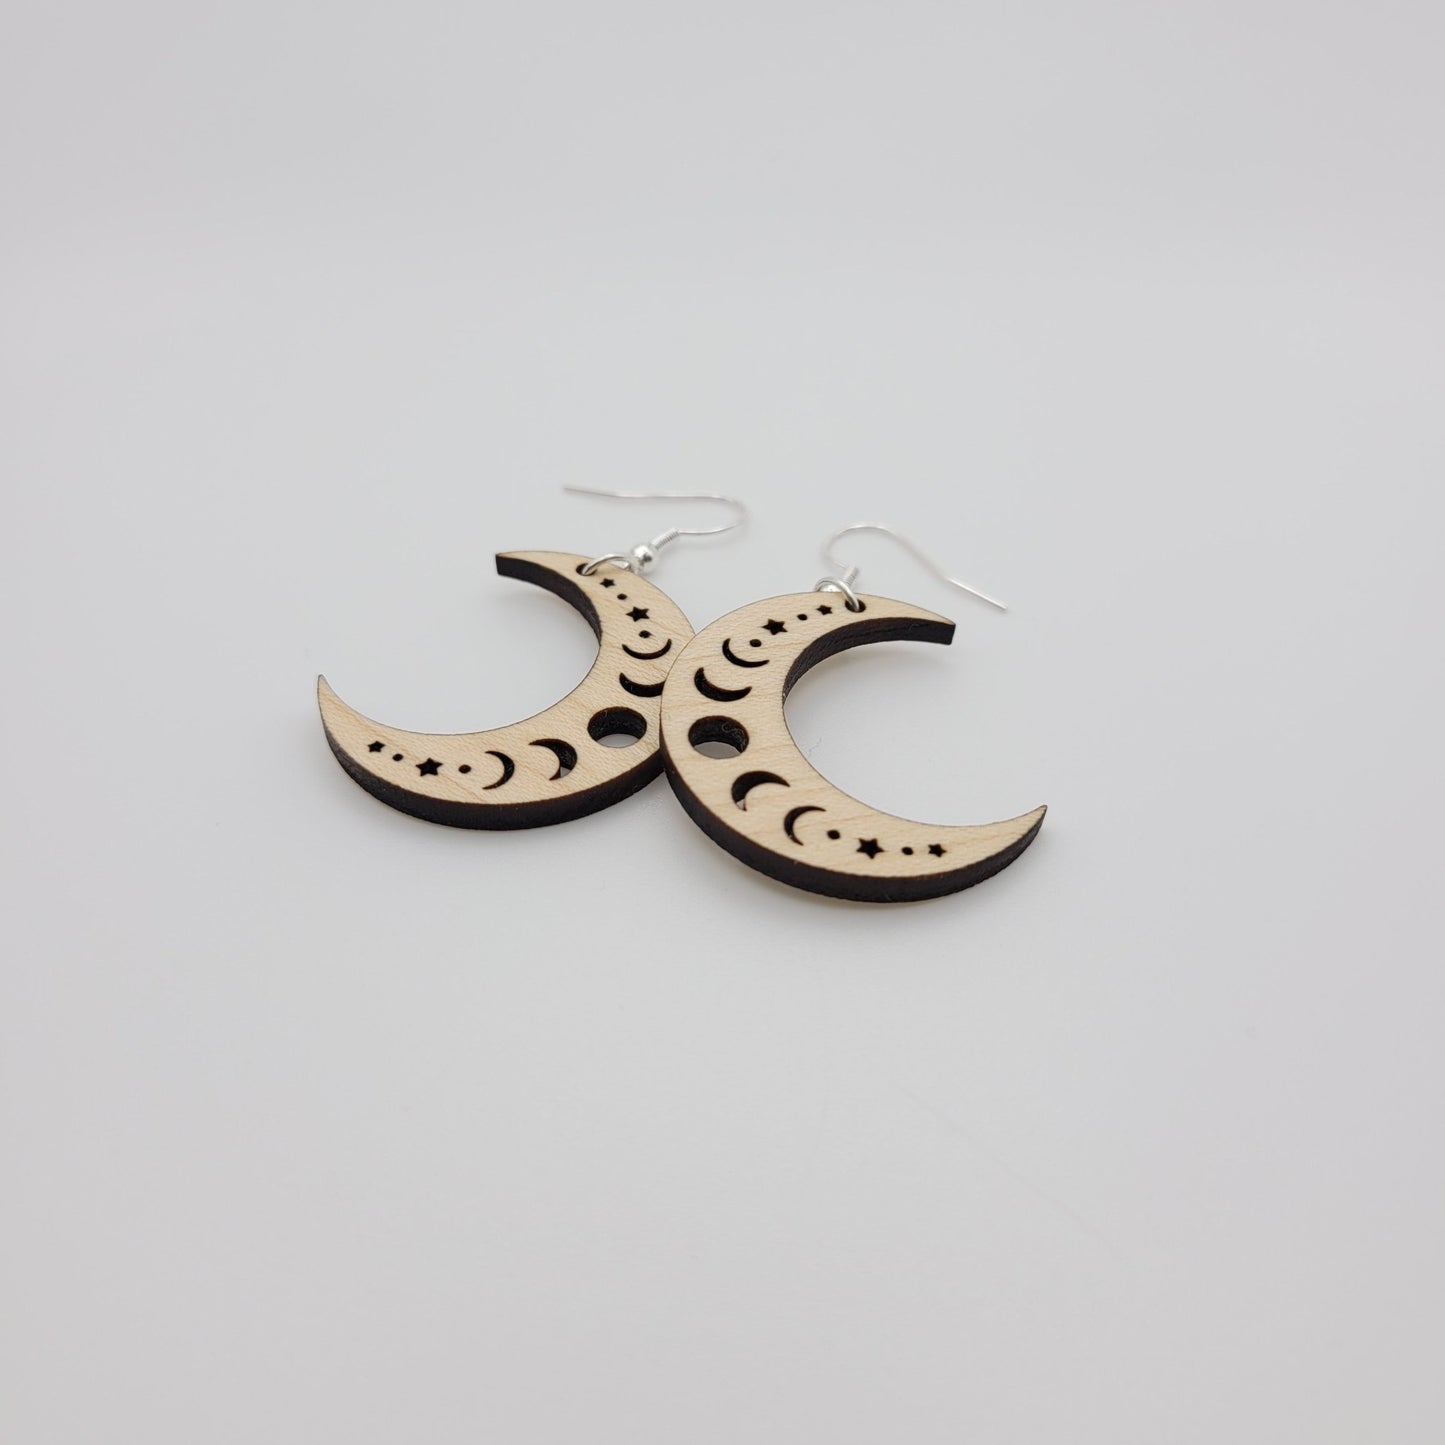 Crescent Moon Phases Dangle Earrings - 4 Arrows Creations